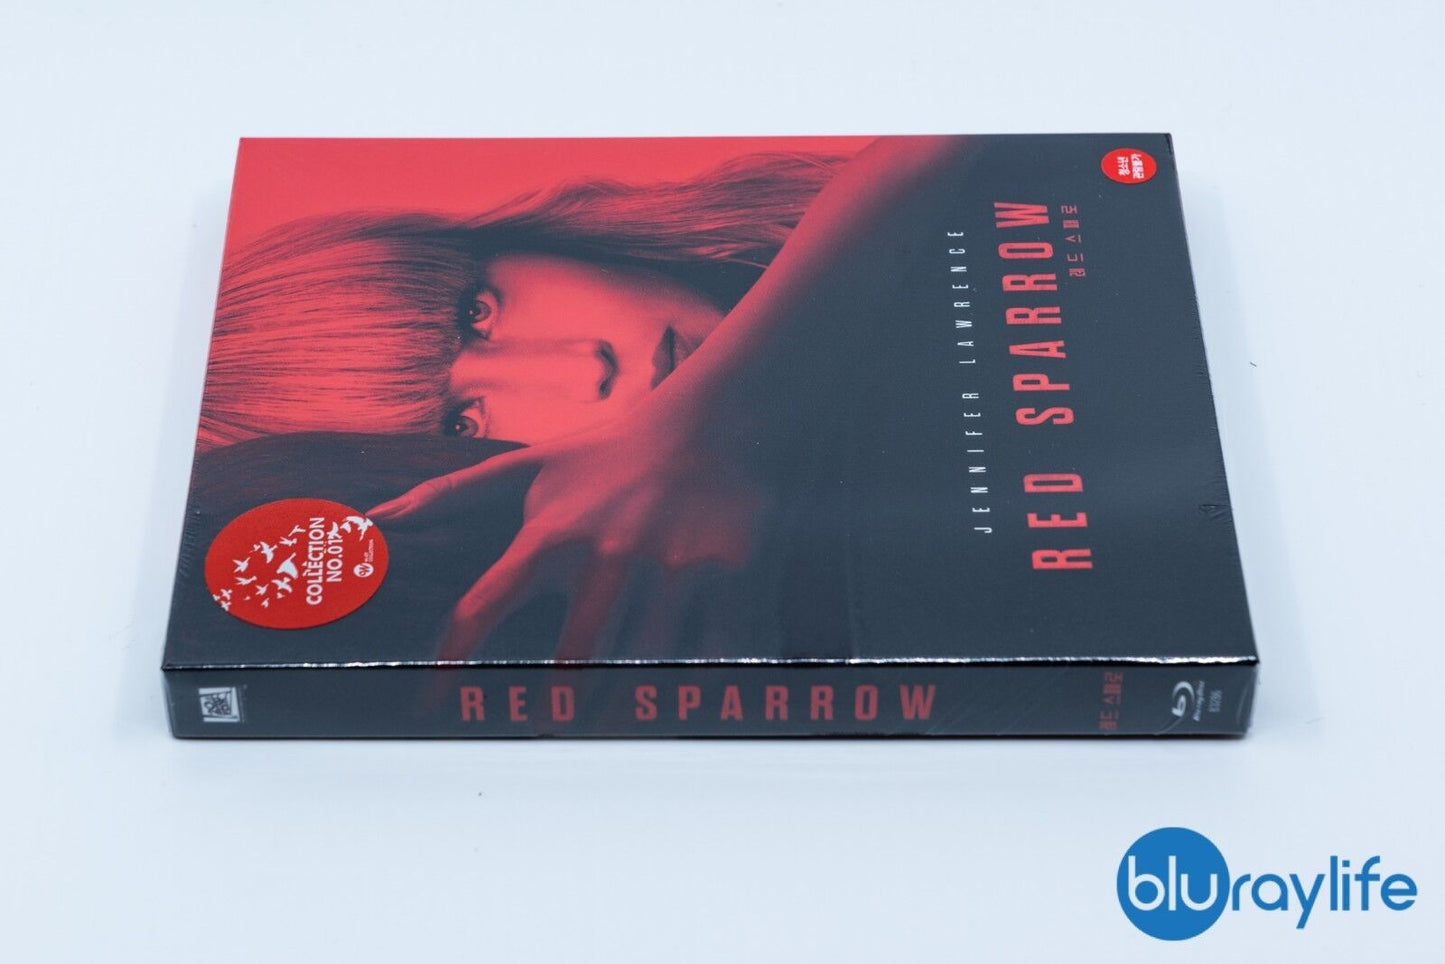 Red Sparrow Blu-Ray Steelbook WeET Collection Collection #1 Full Slip